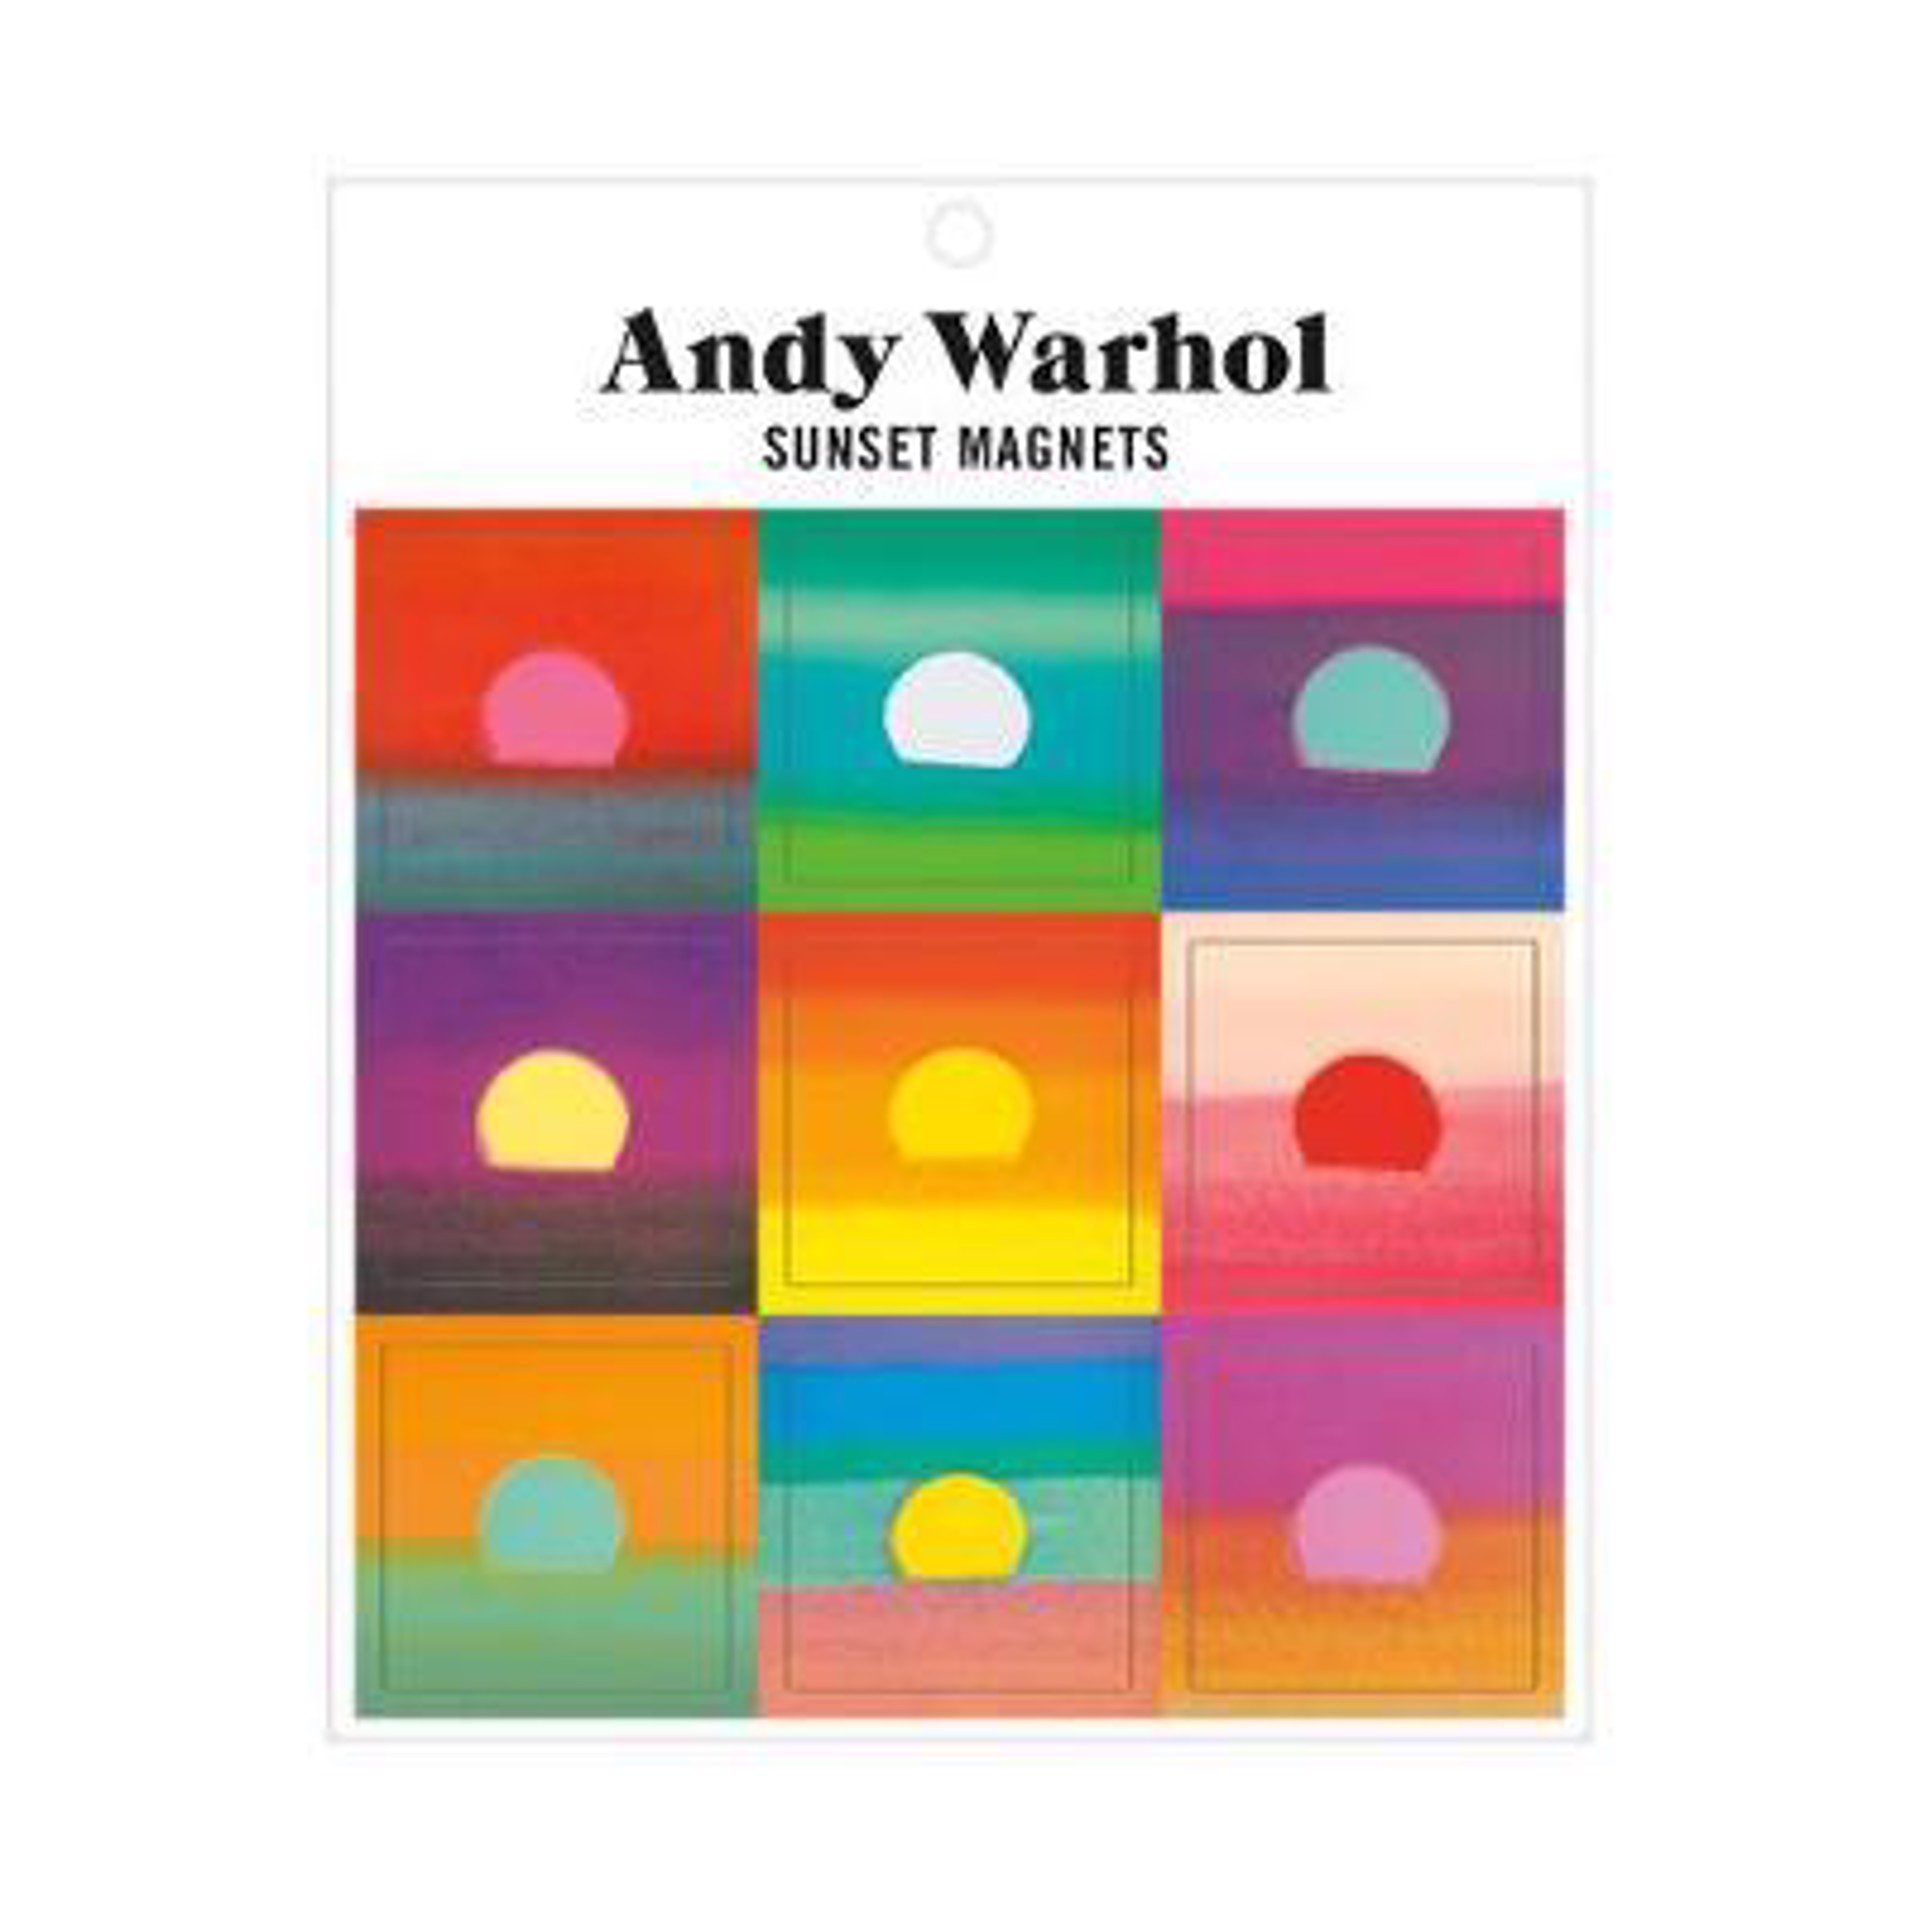 Sunset Magnets by Andy Warhol